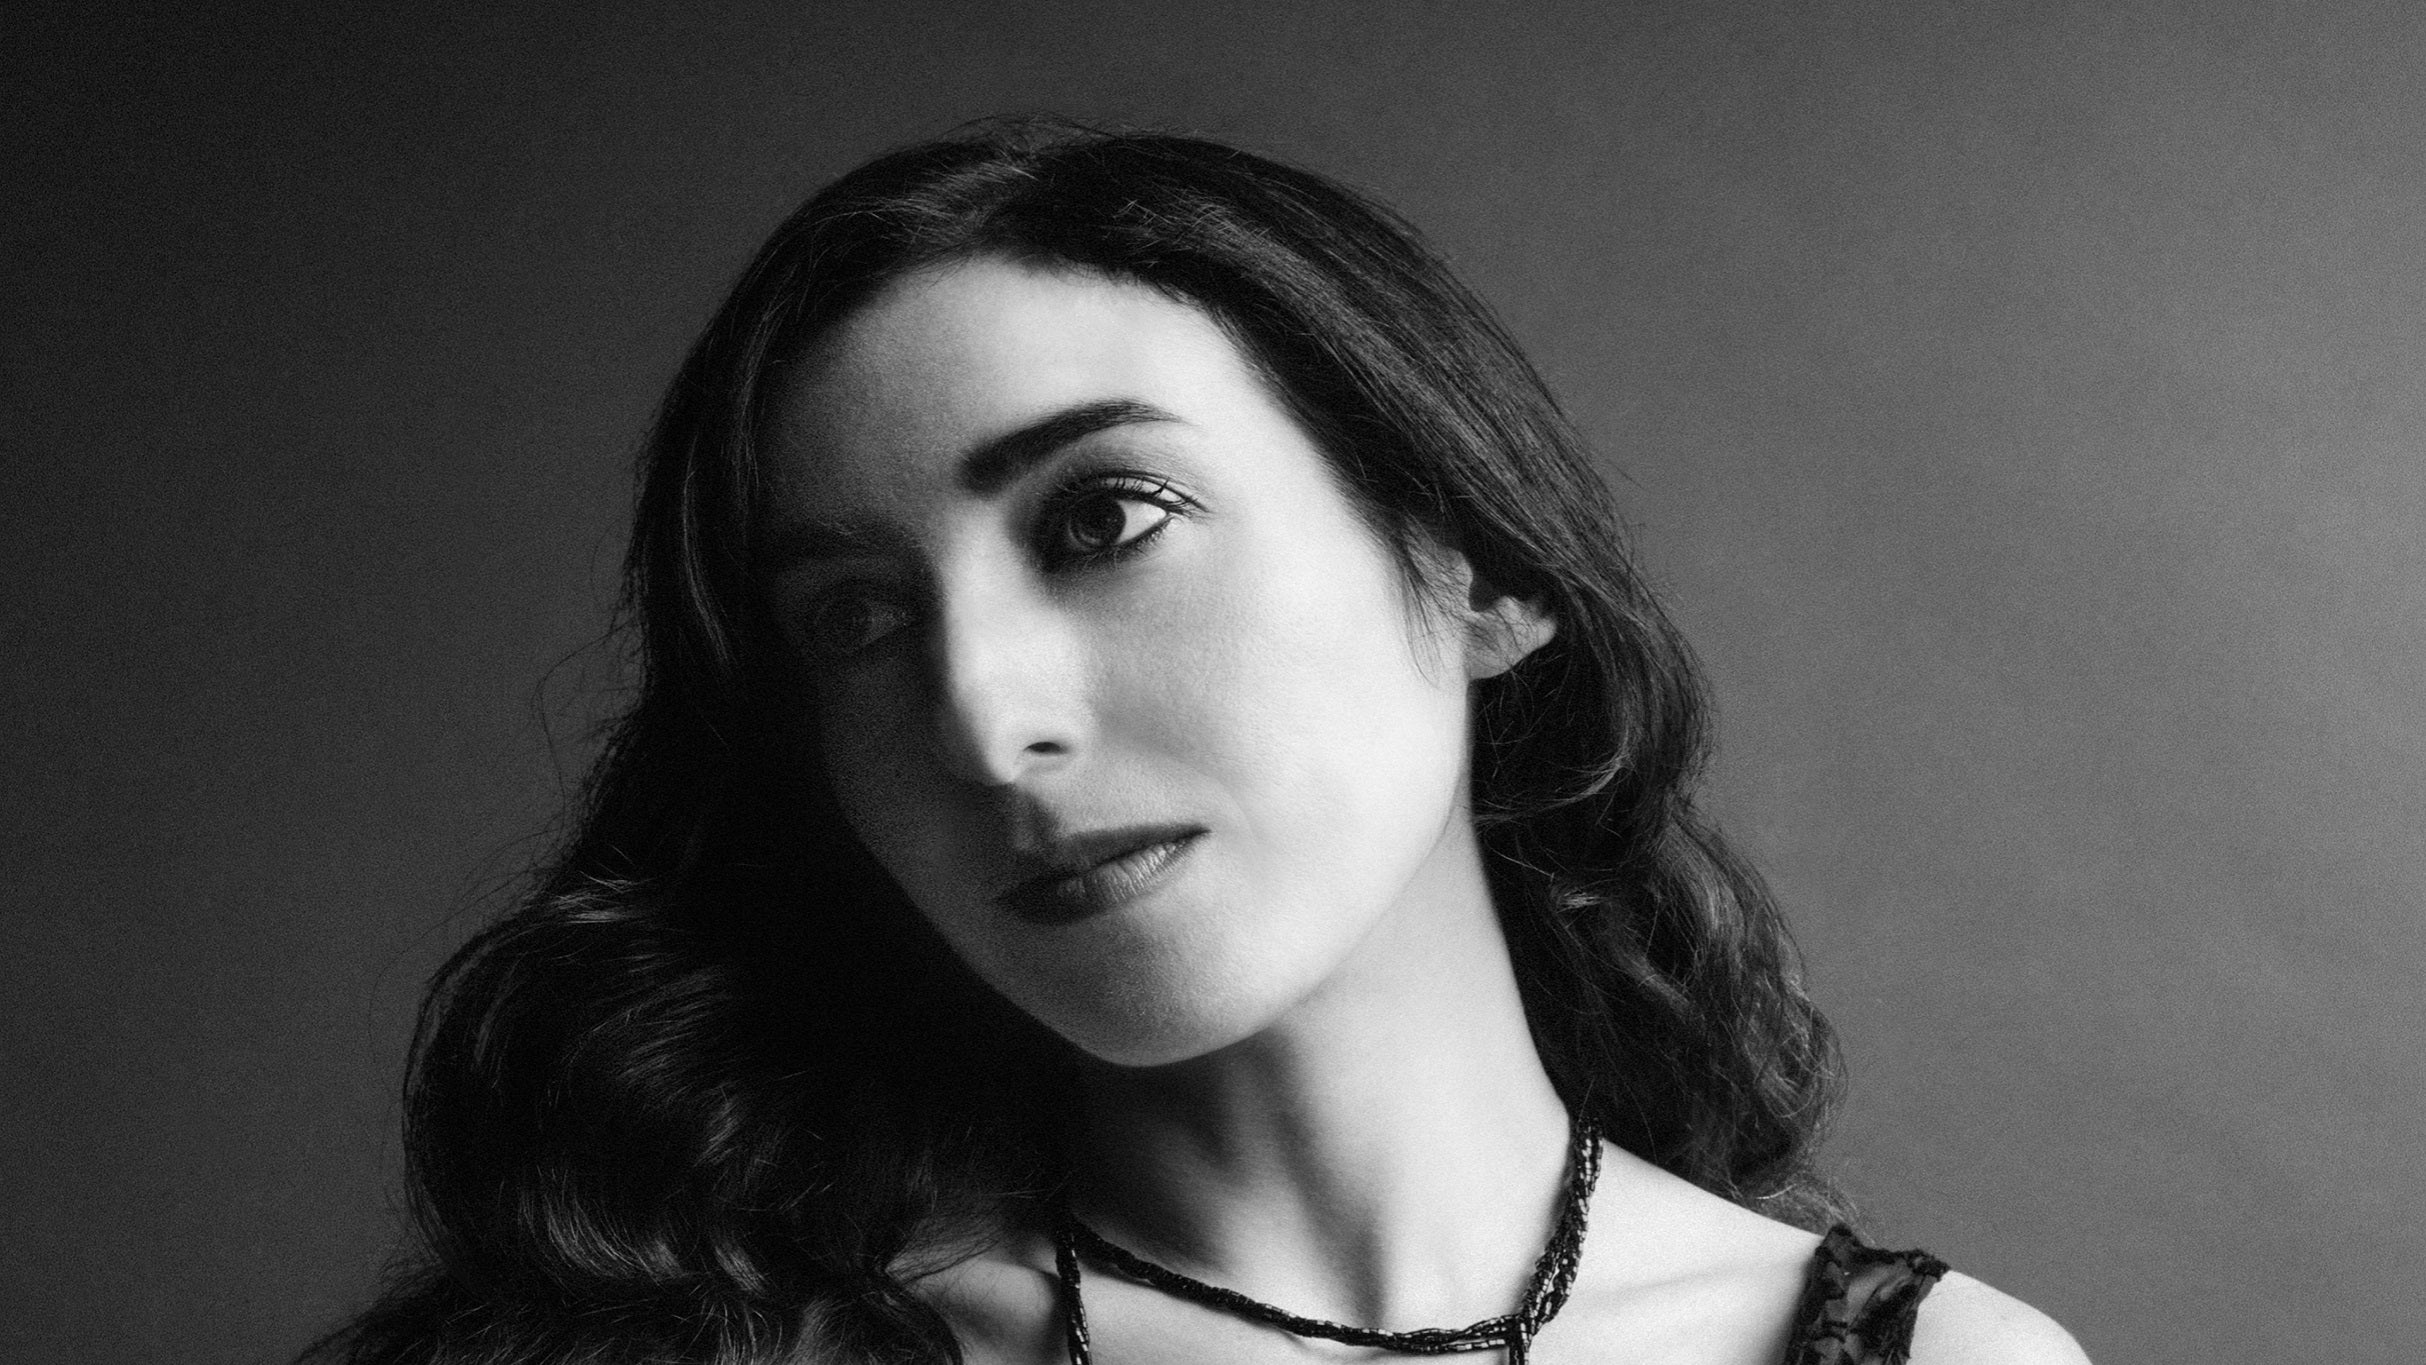 MARISSA NADLER with JESSE SYKES at The Showdown